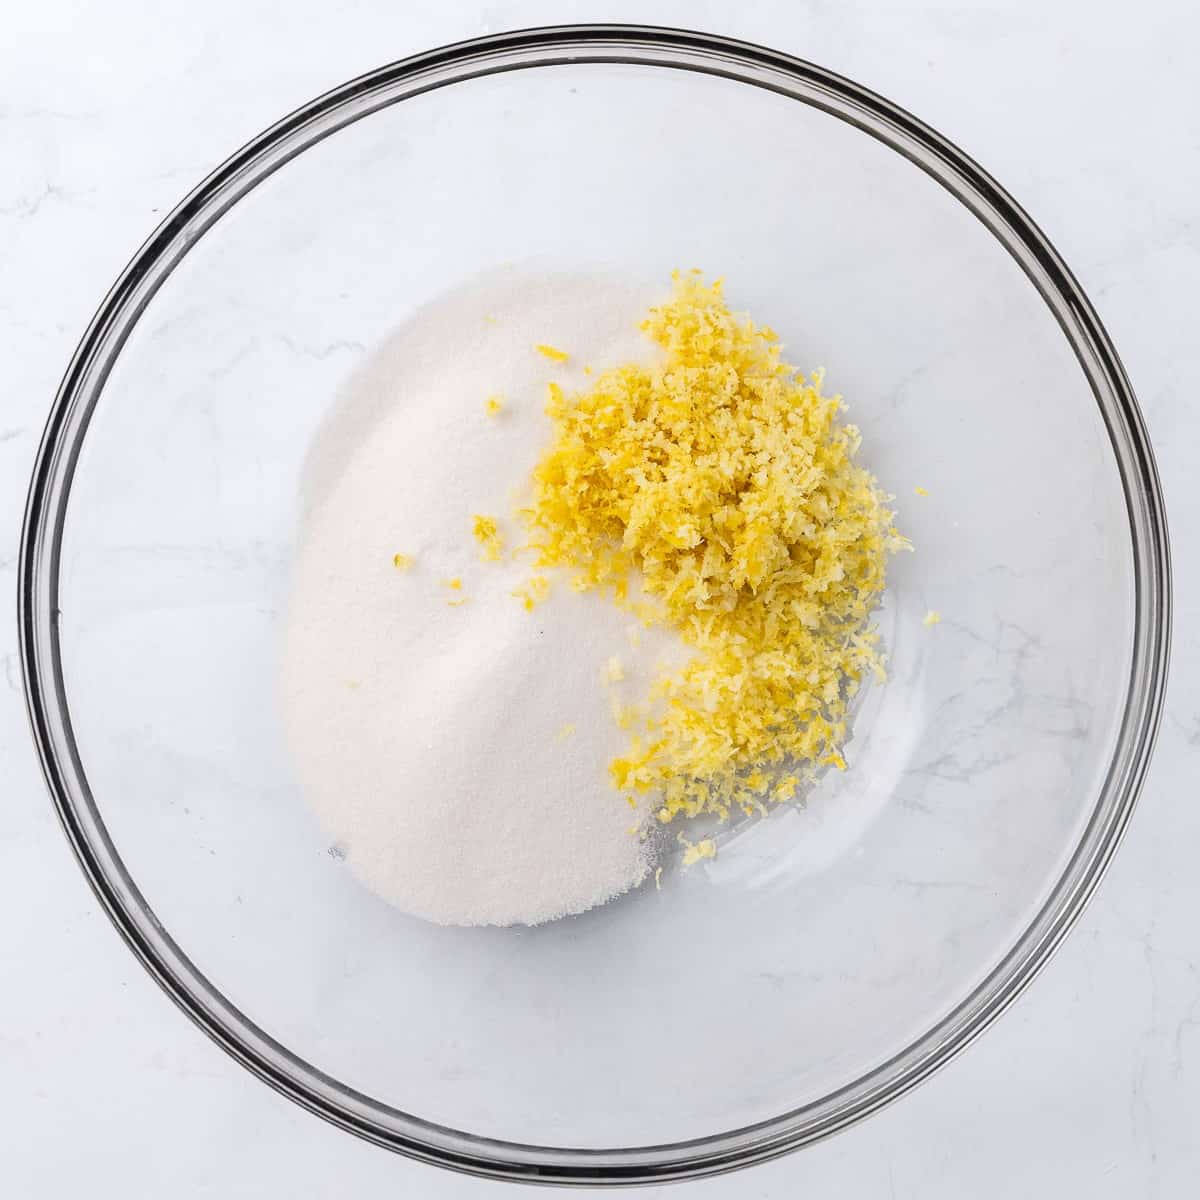 Granulated sugar and lemon zest in a large glass mixing bowl.